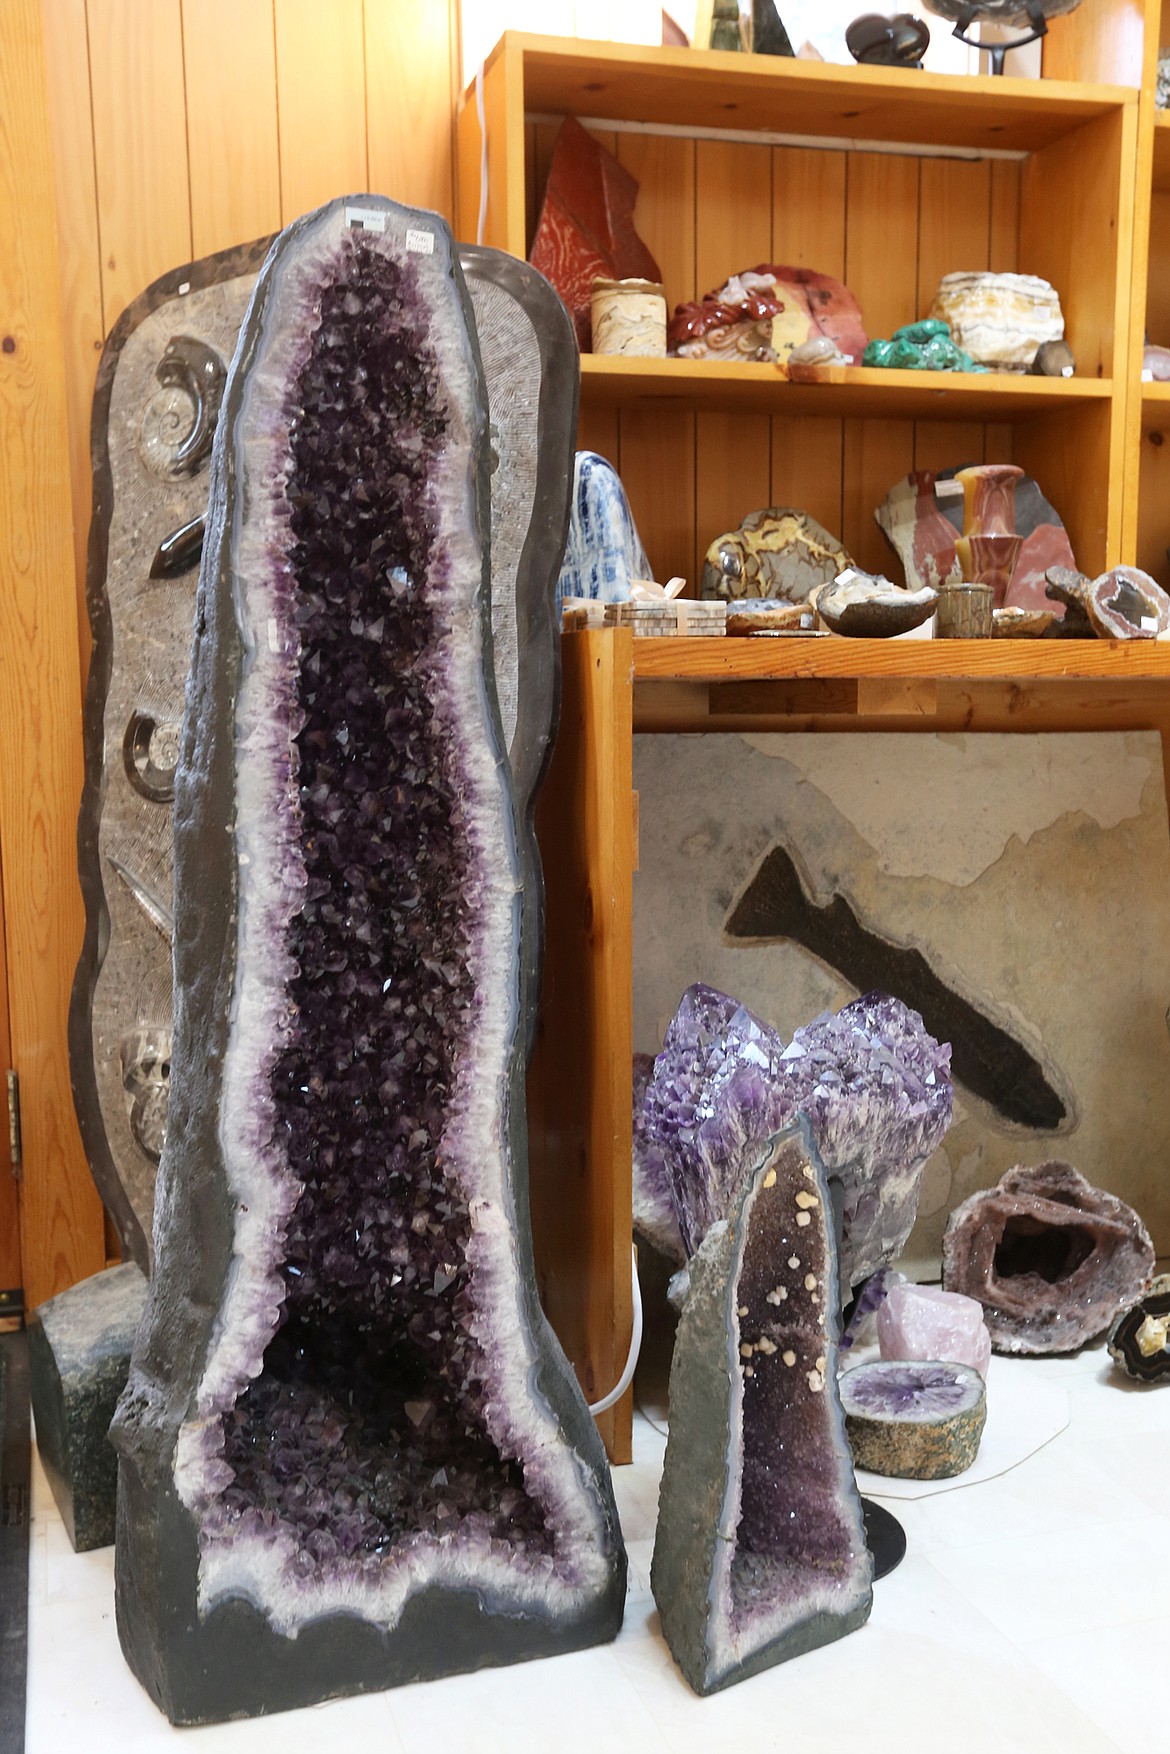 Kehoe’s Agate Shop carries rocks and gems of all sizes, some as large as this Amethyst geode. (Mackenzie Reiss/Daily Inter Lake)